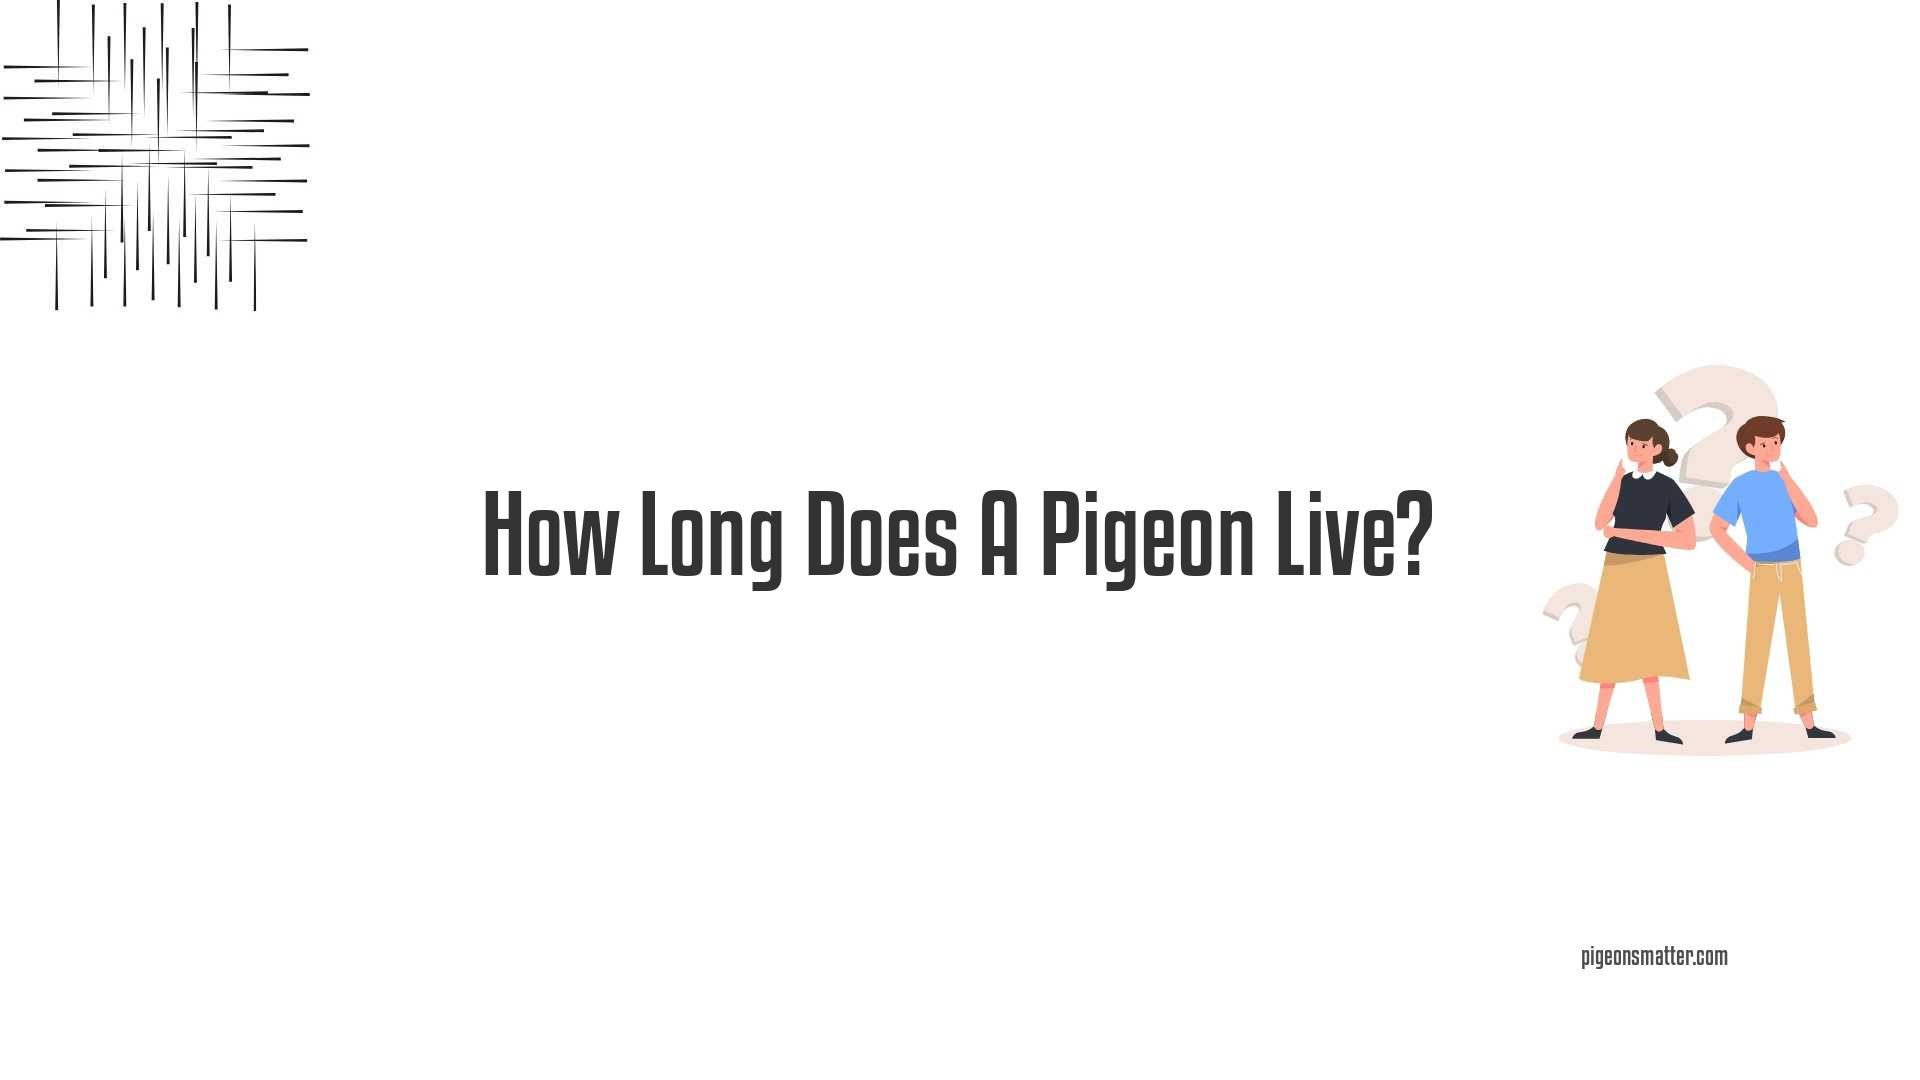 How Long Does A Pigeon Live?